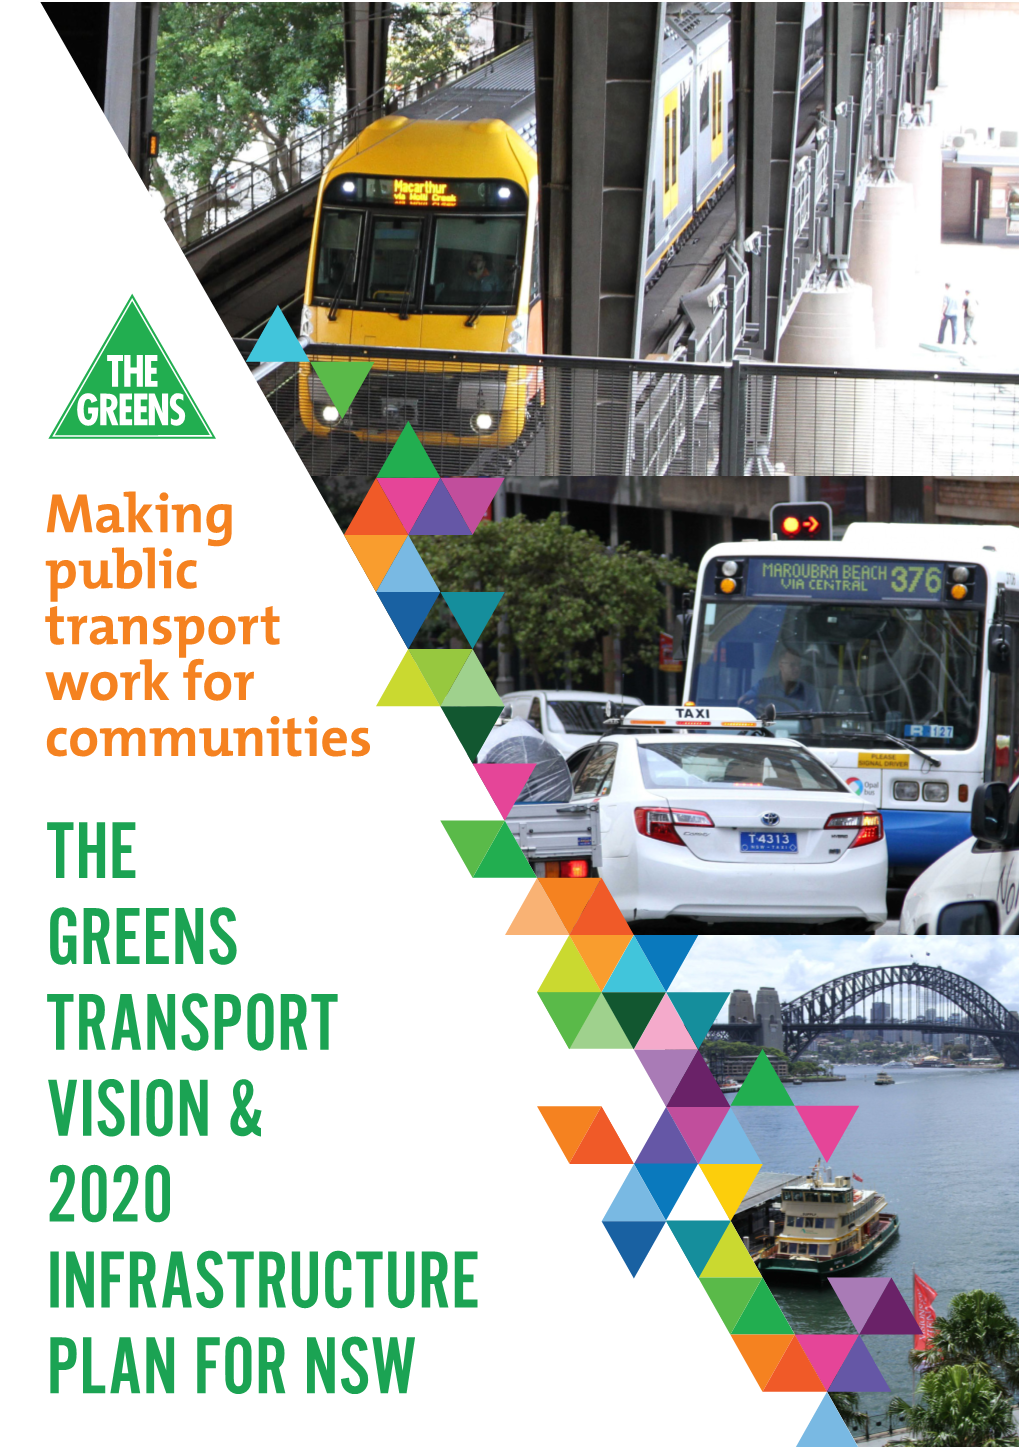 The Greens Transport Vision & 2020 Infrastructure Plan